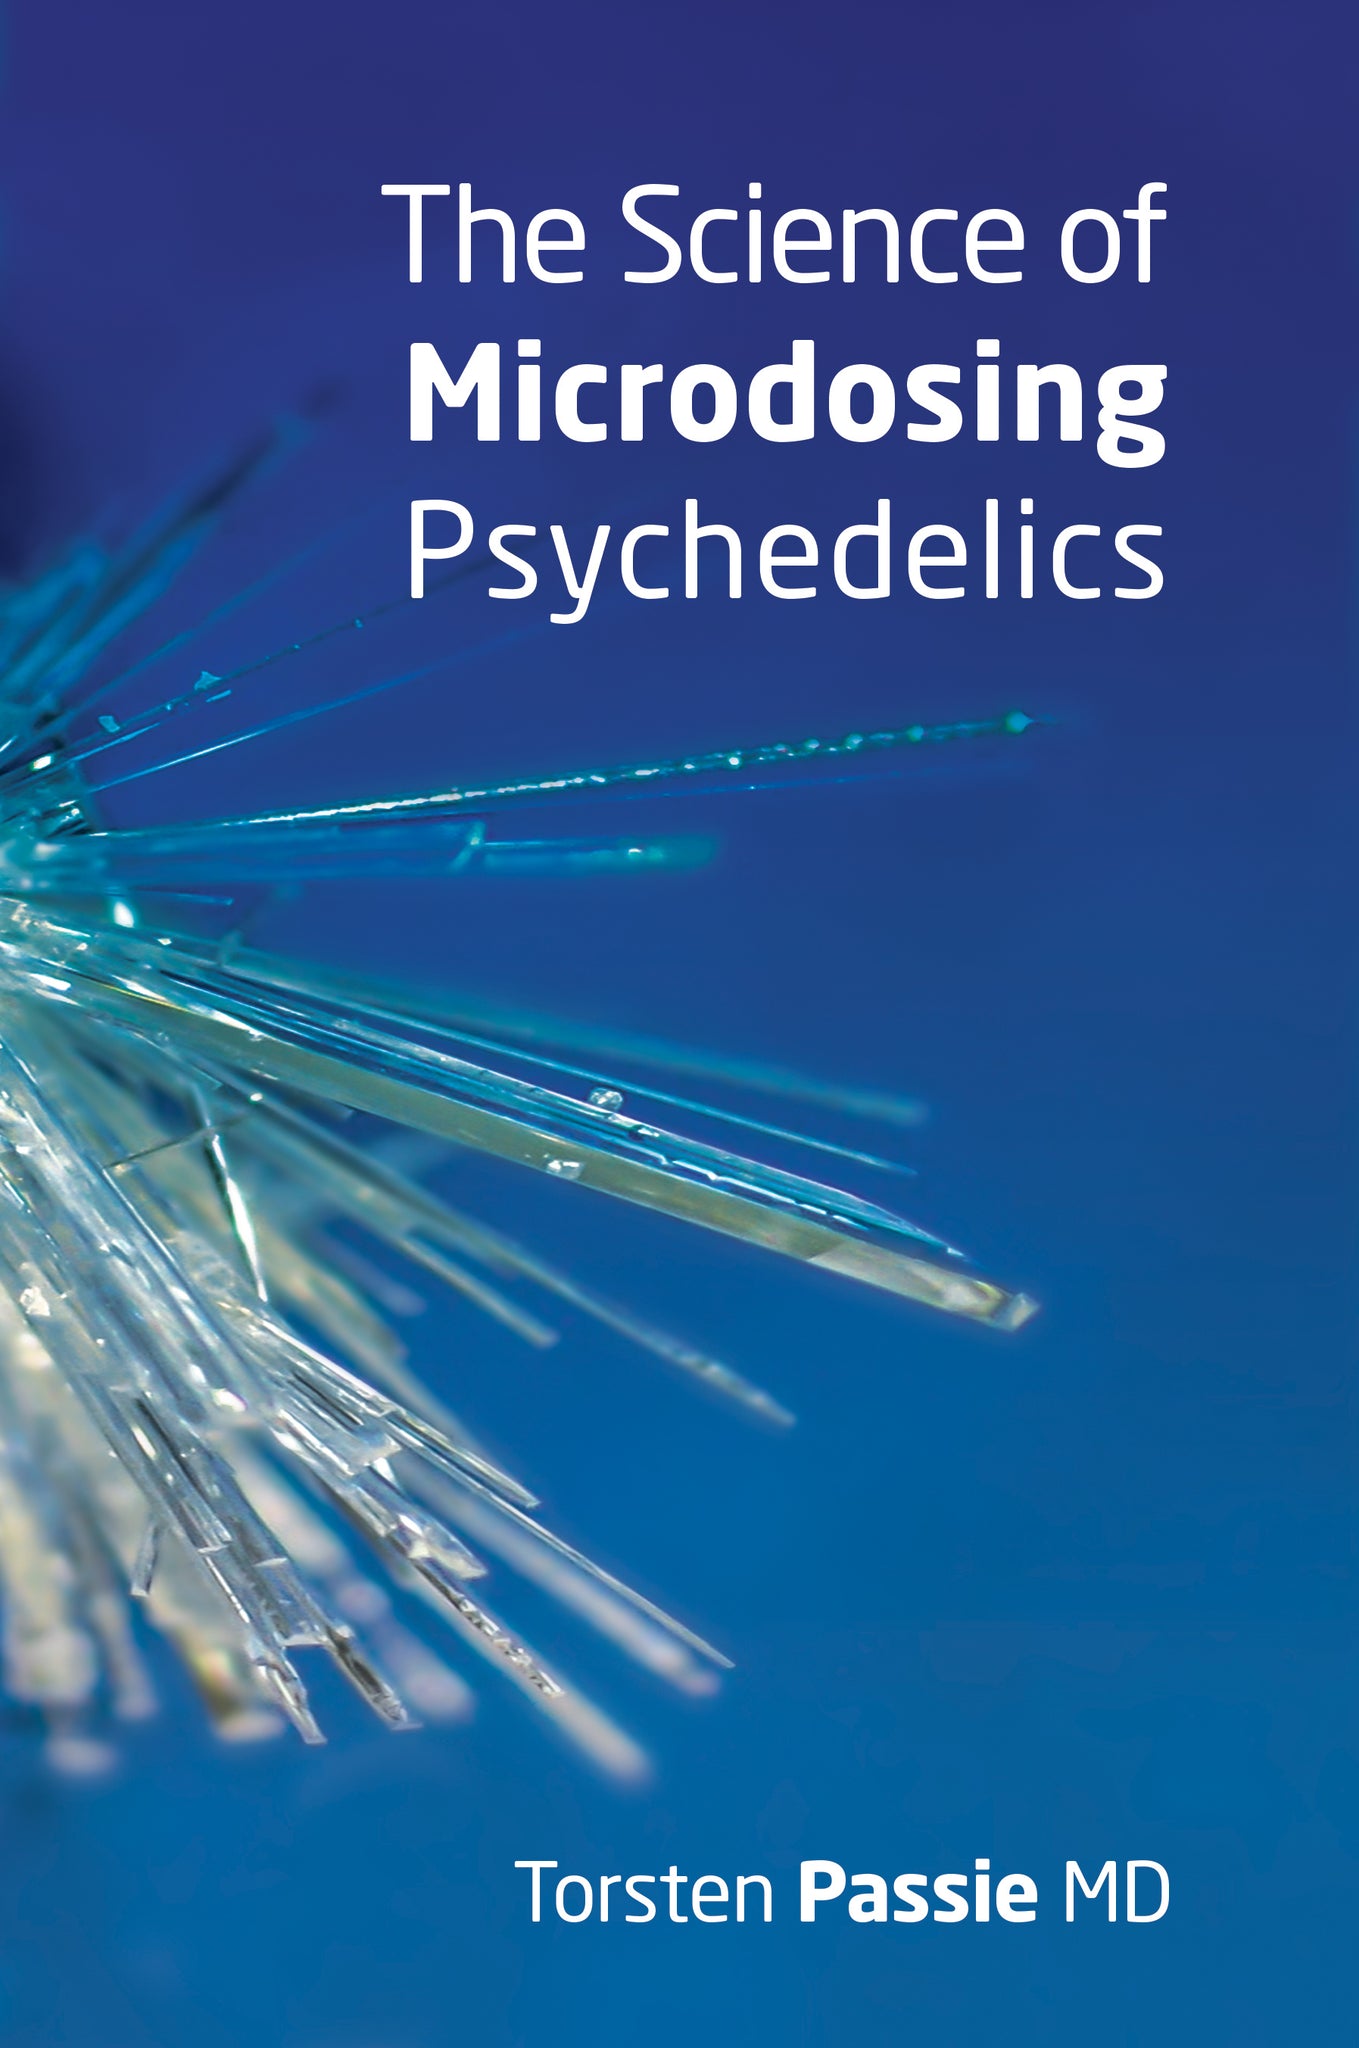 The Science of Microdosing Psychedelics by Torsten Passie